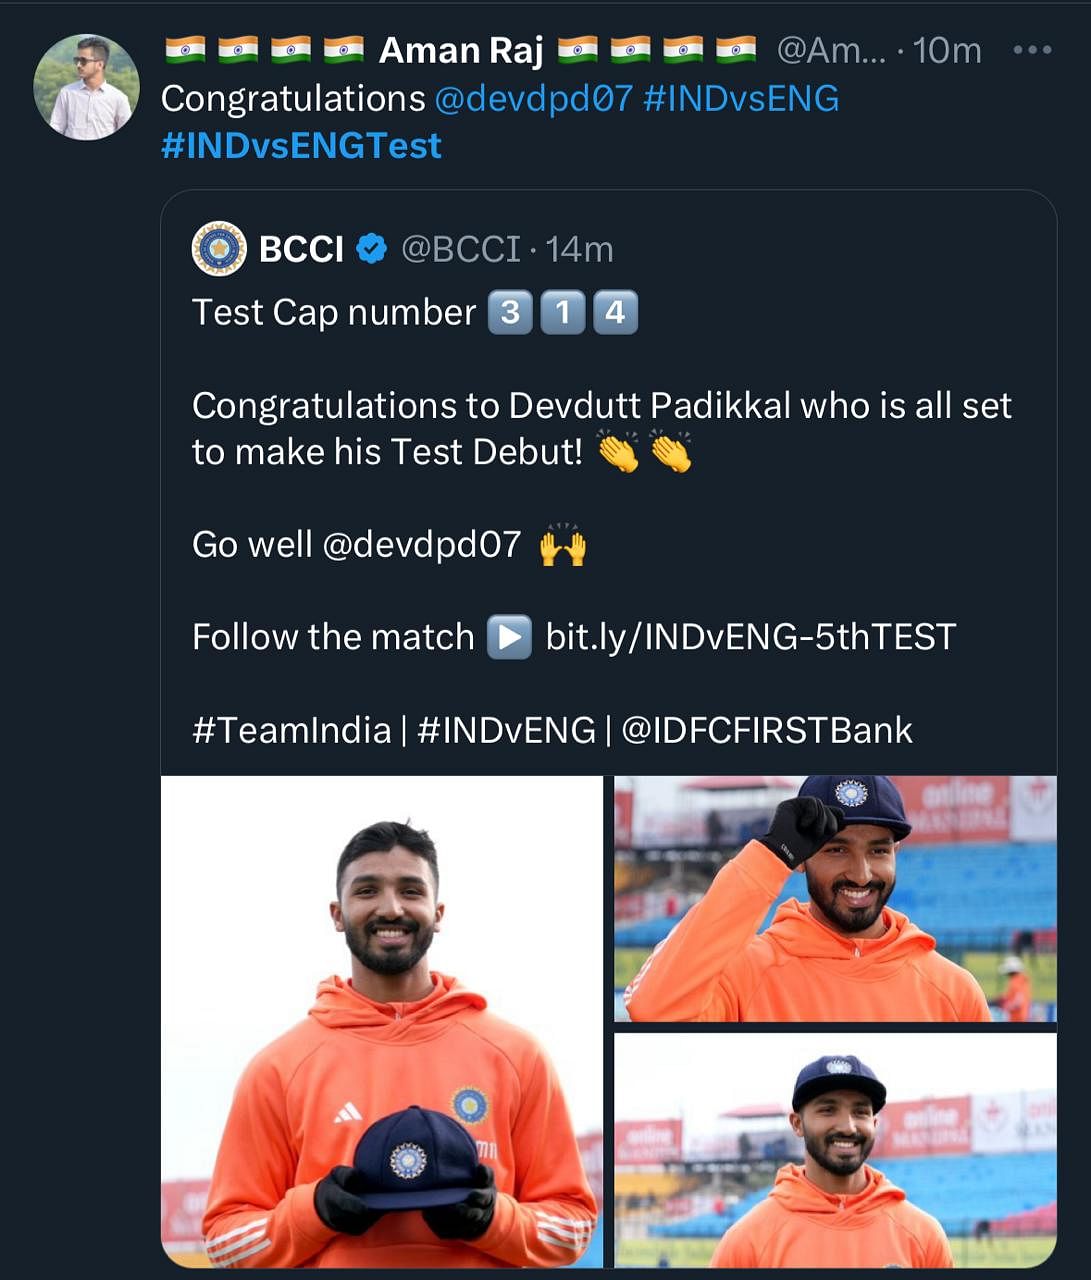 #IndvsEng | Devdutt Padikkal received his devut Test cap from #RAshwin, who is playing his 100th Test.